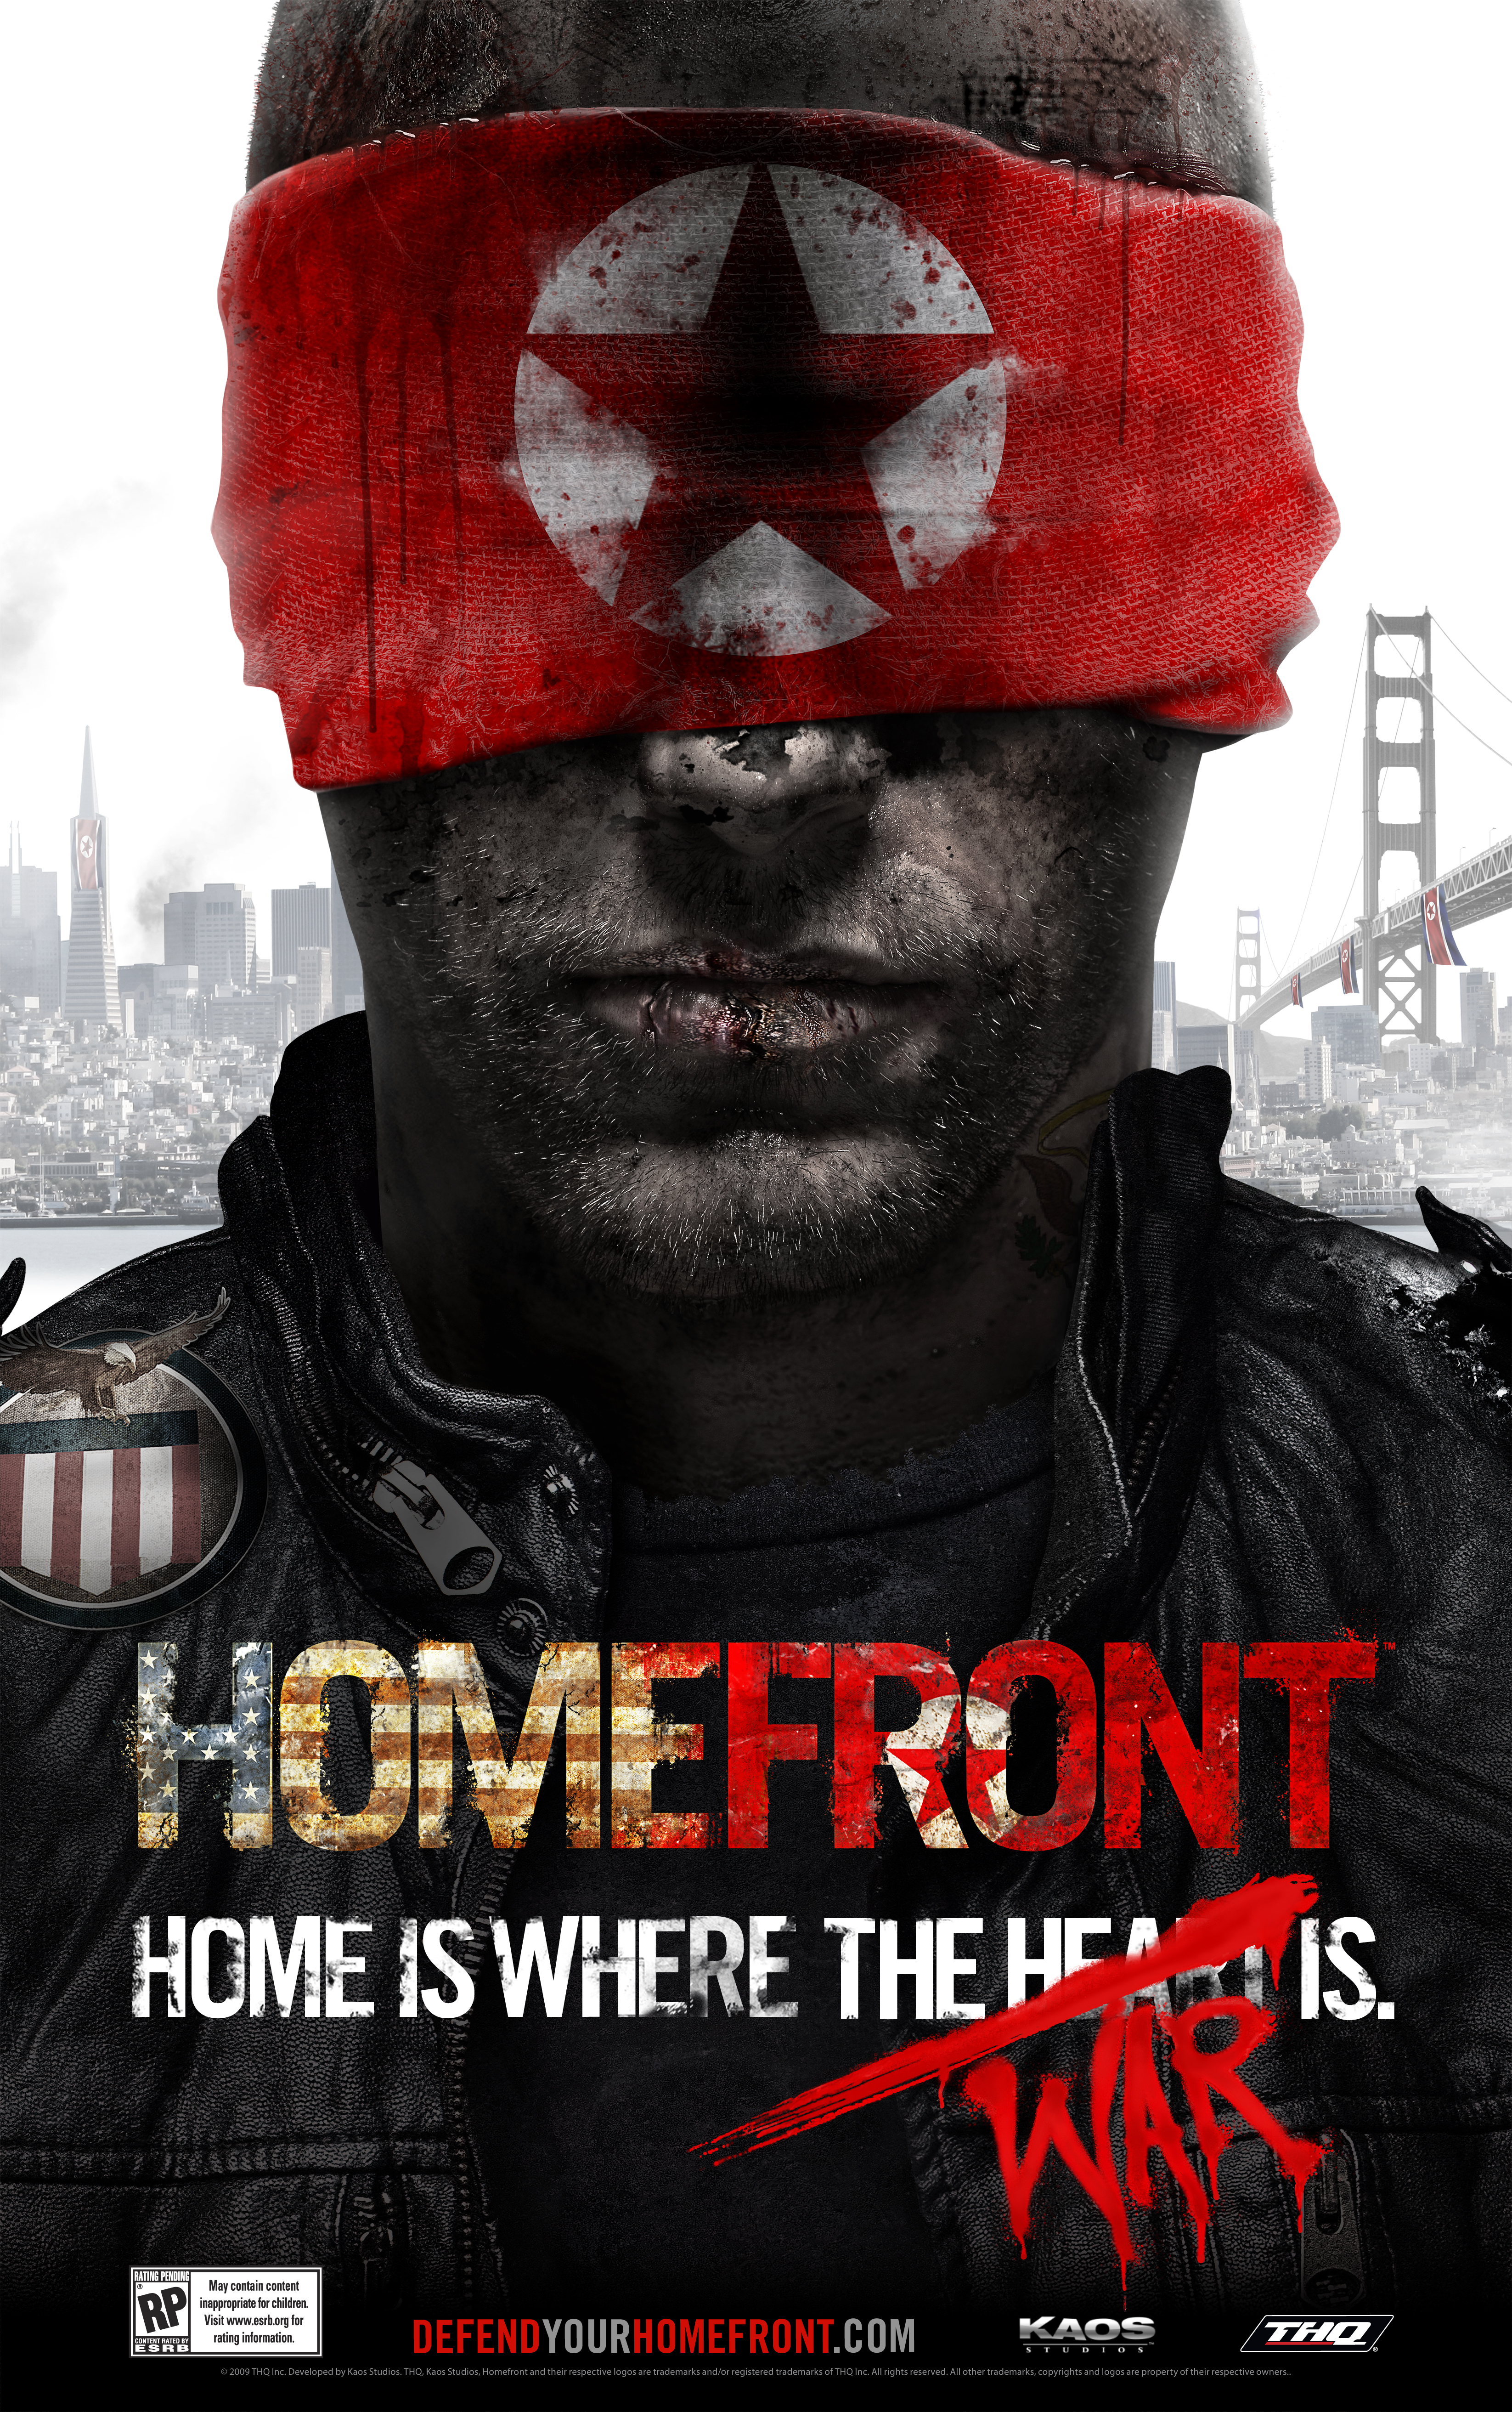 Bad news comes in threes for Homefront - Player Attack